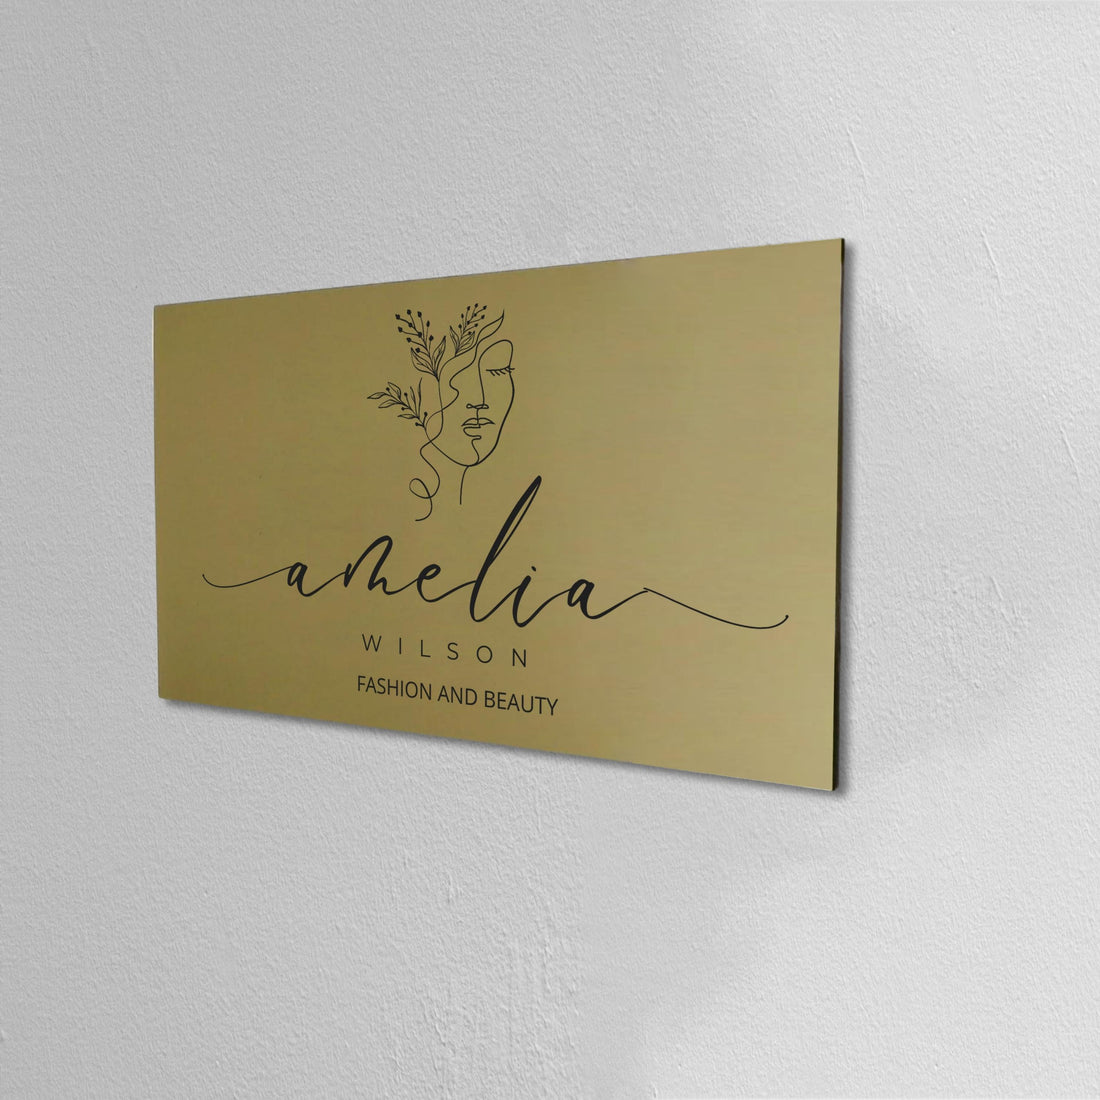 Personalised Acrylic Company Room Name Sign, Office Door Number, Business Wall Plate, Custom Professional Plaque Studio Title Banner Signage